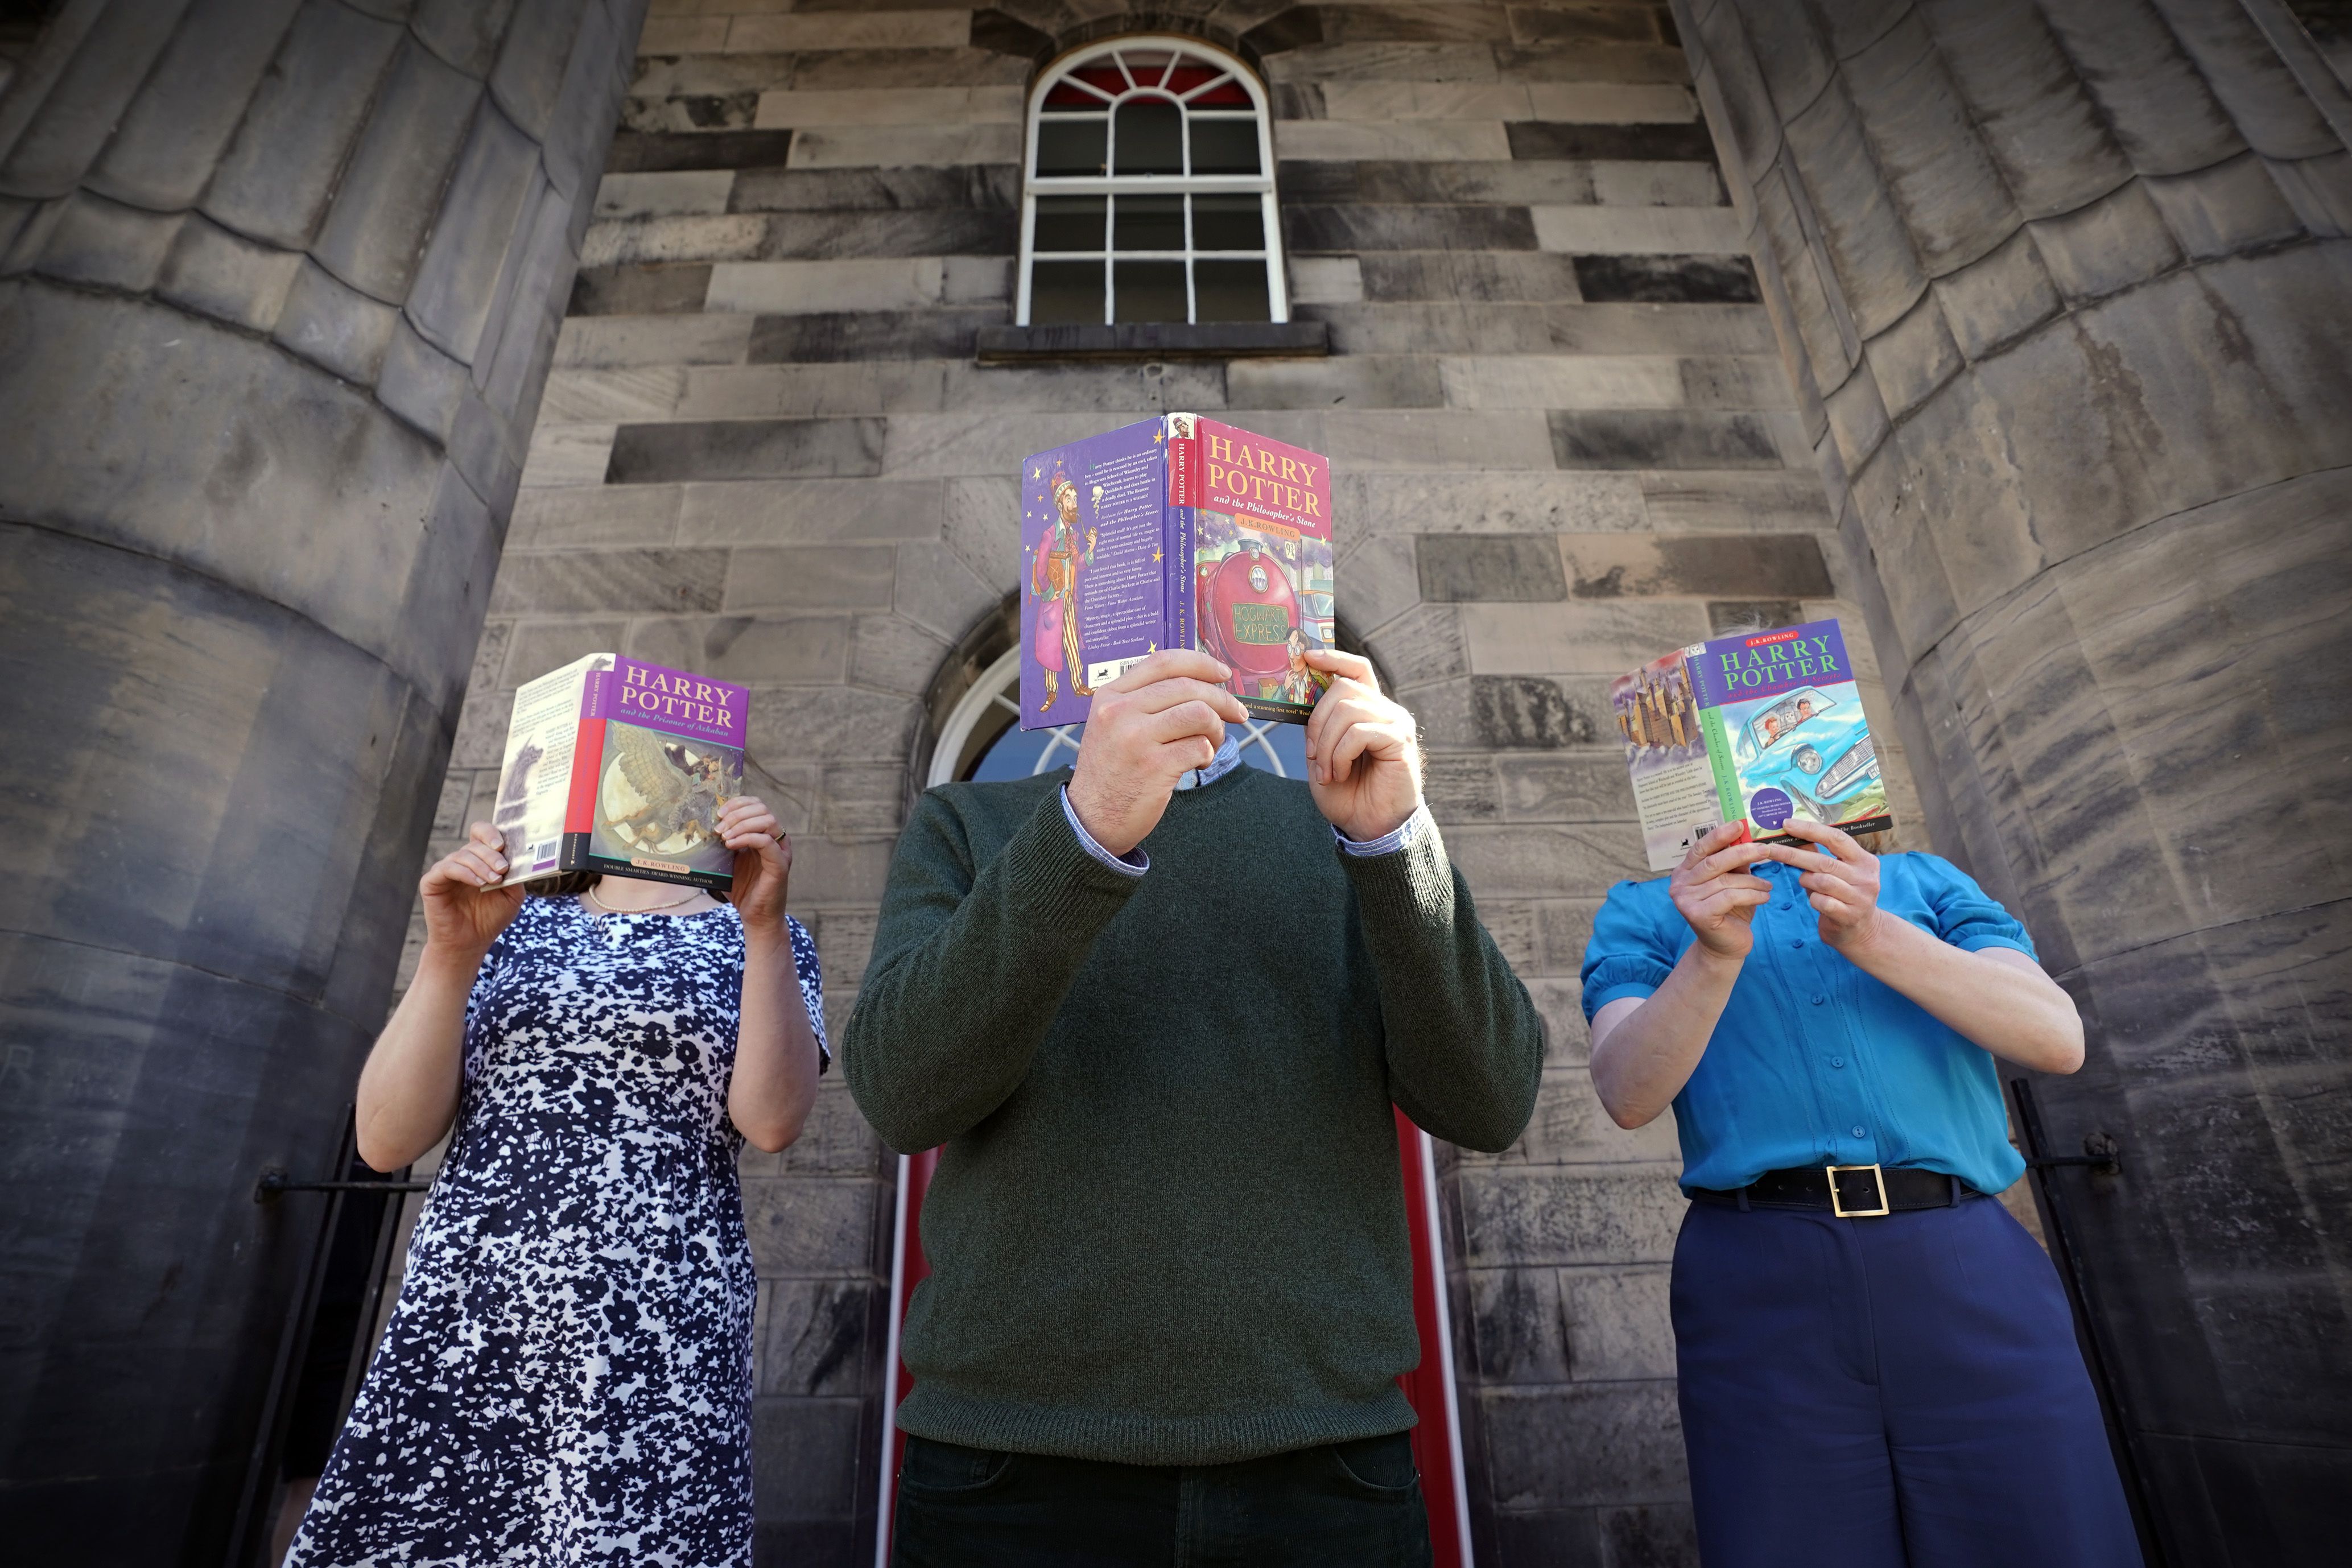 The people holding Harry Potter books in front of their faces